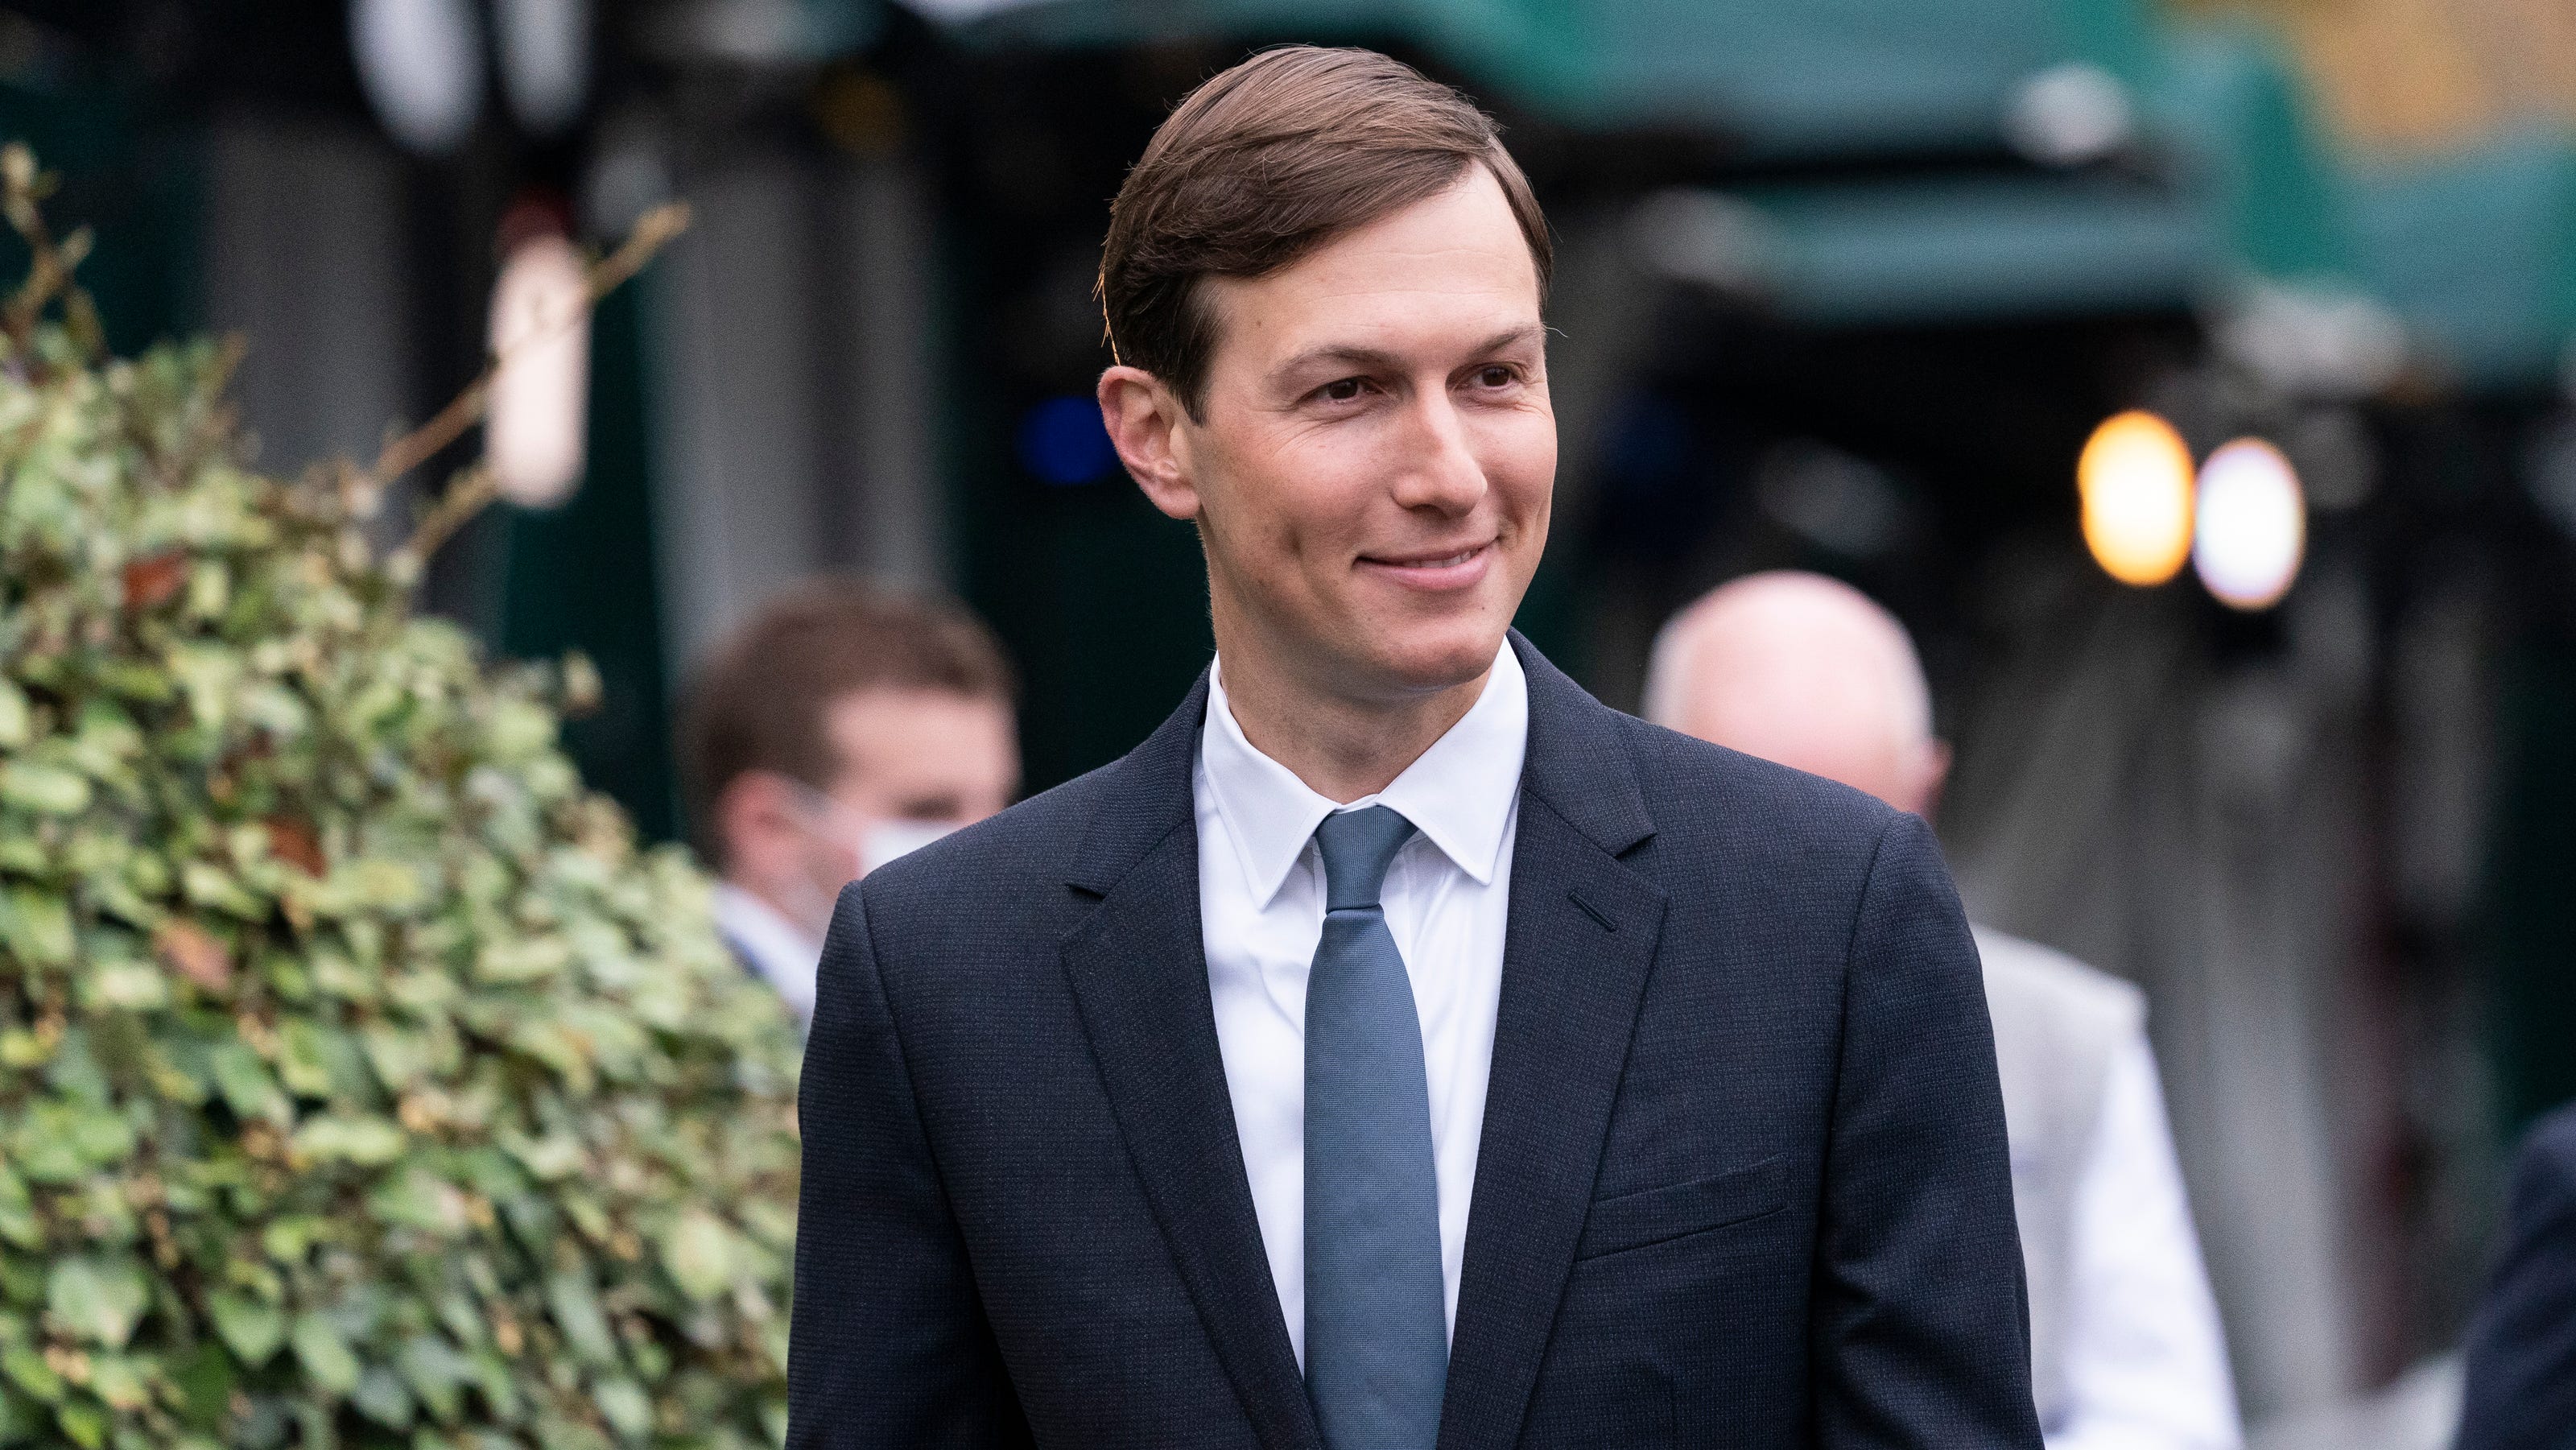 Jared Kushner criticized after saying Black Americans need to 'want to be successful'